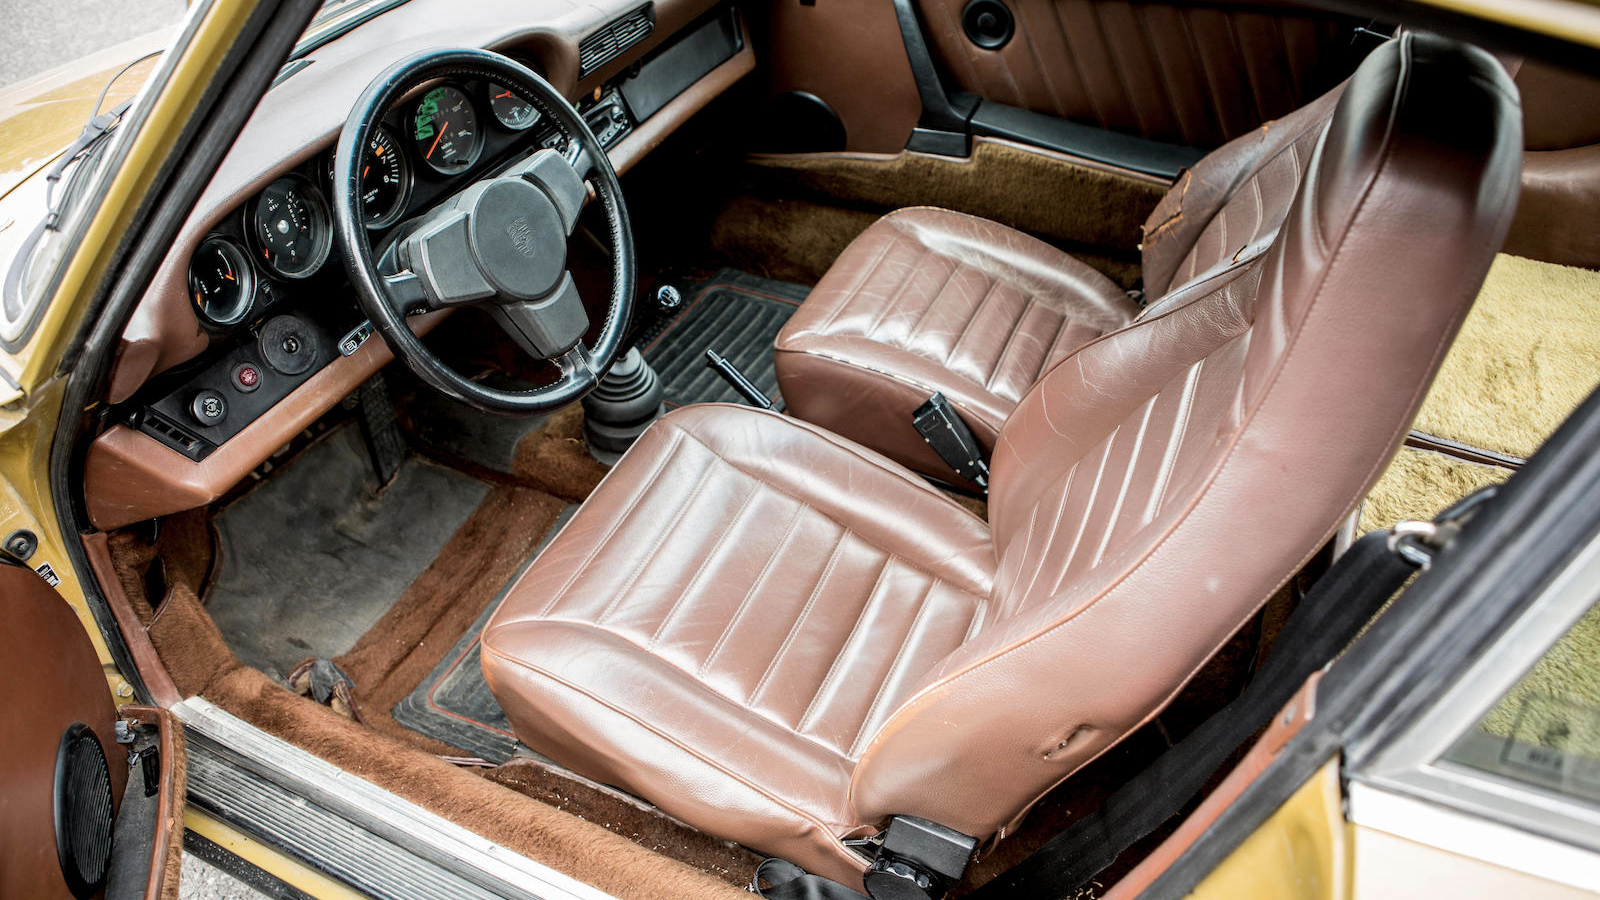 The Porsche 911S from The Bridge is being auctioned for charity